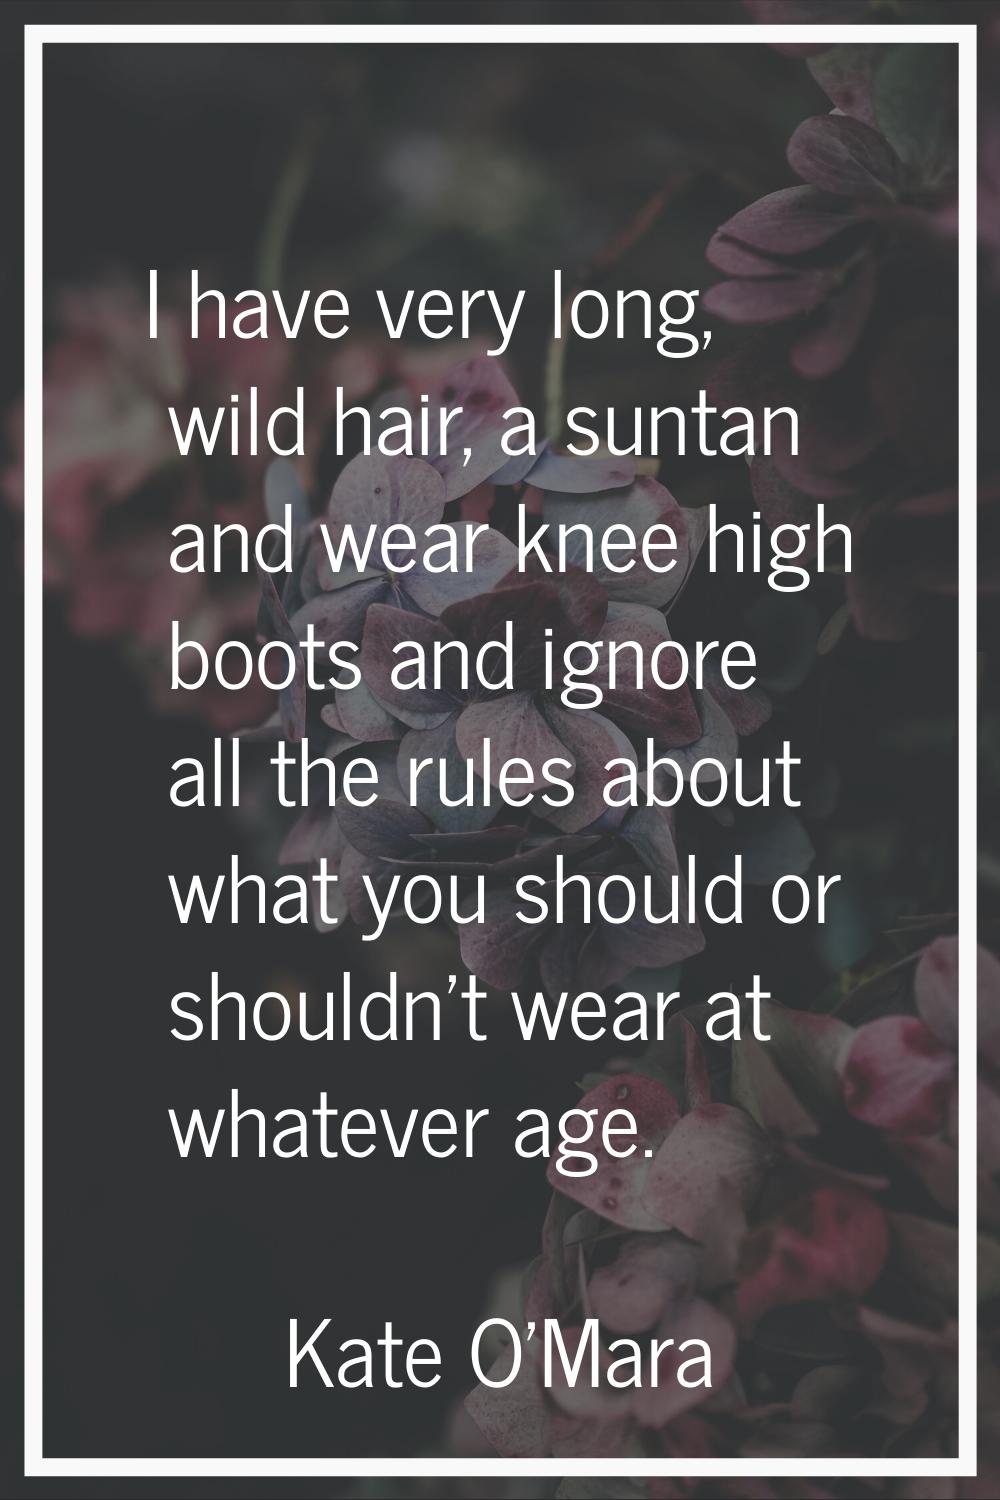 I have very long, wild hair, a suntan and wear knee high boots and ignore all the rules about what 